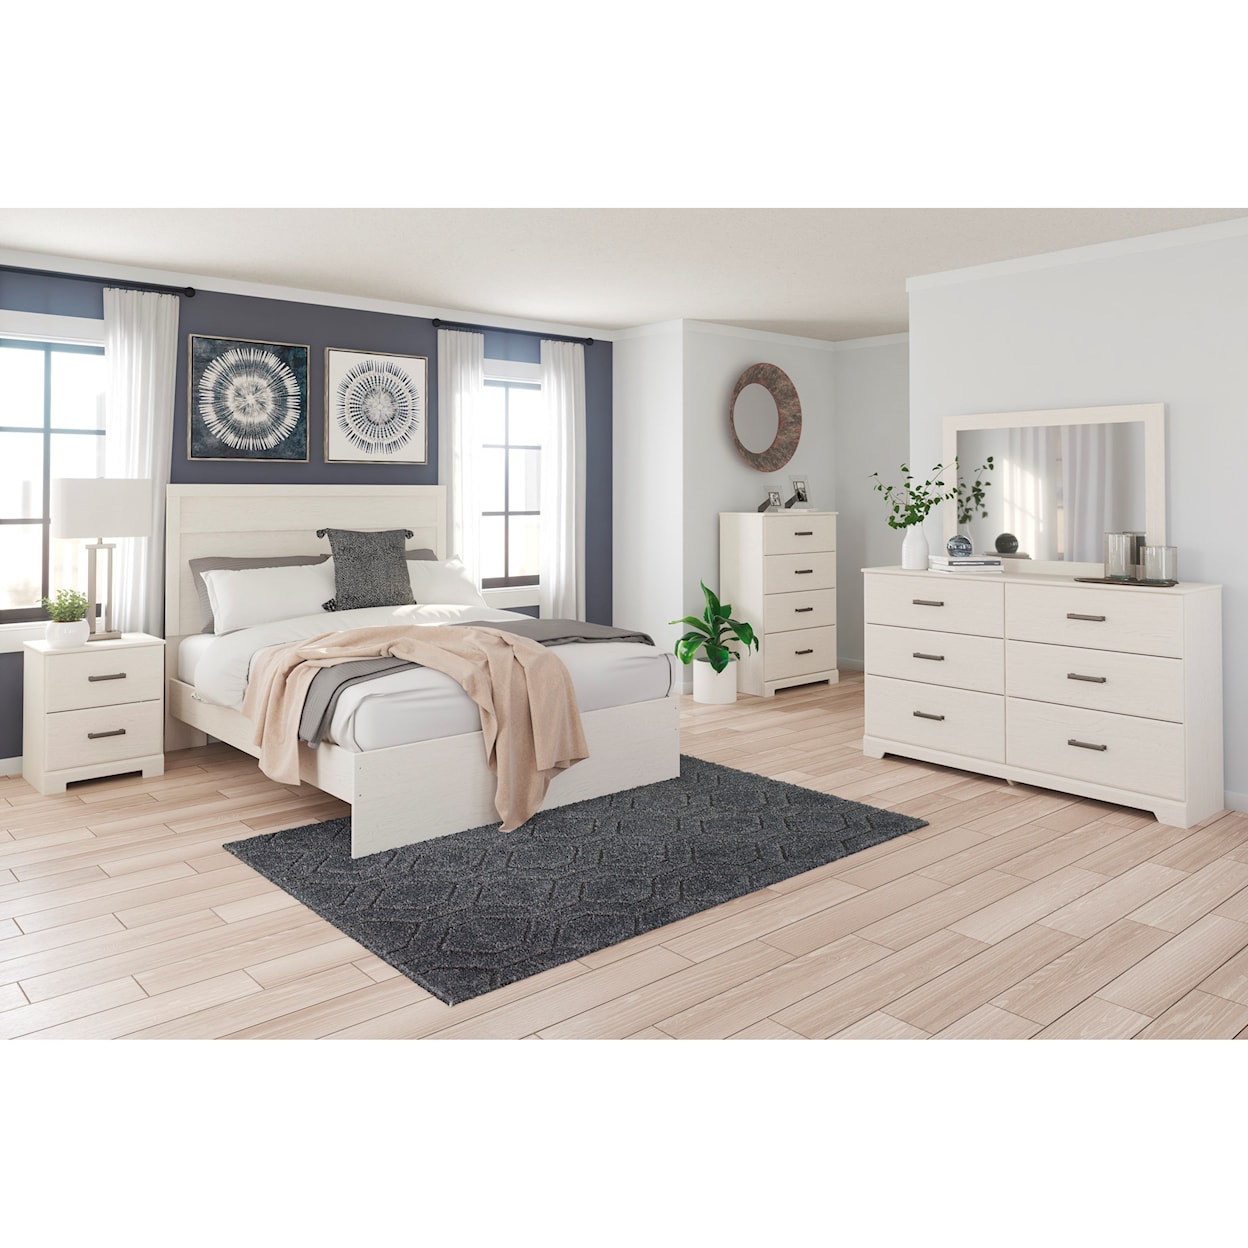 Signature Design by Ashley Stelsie Queen Panel Bed